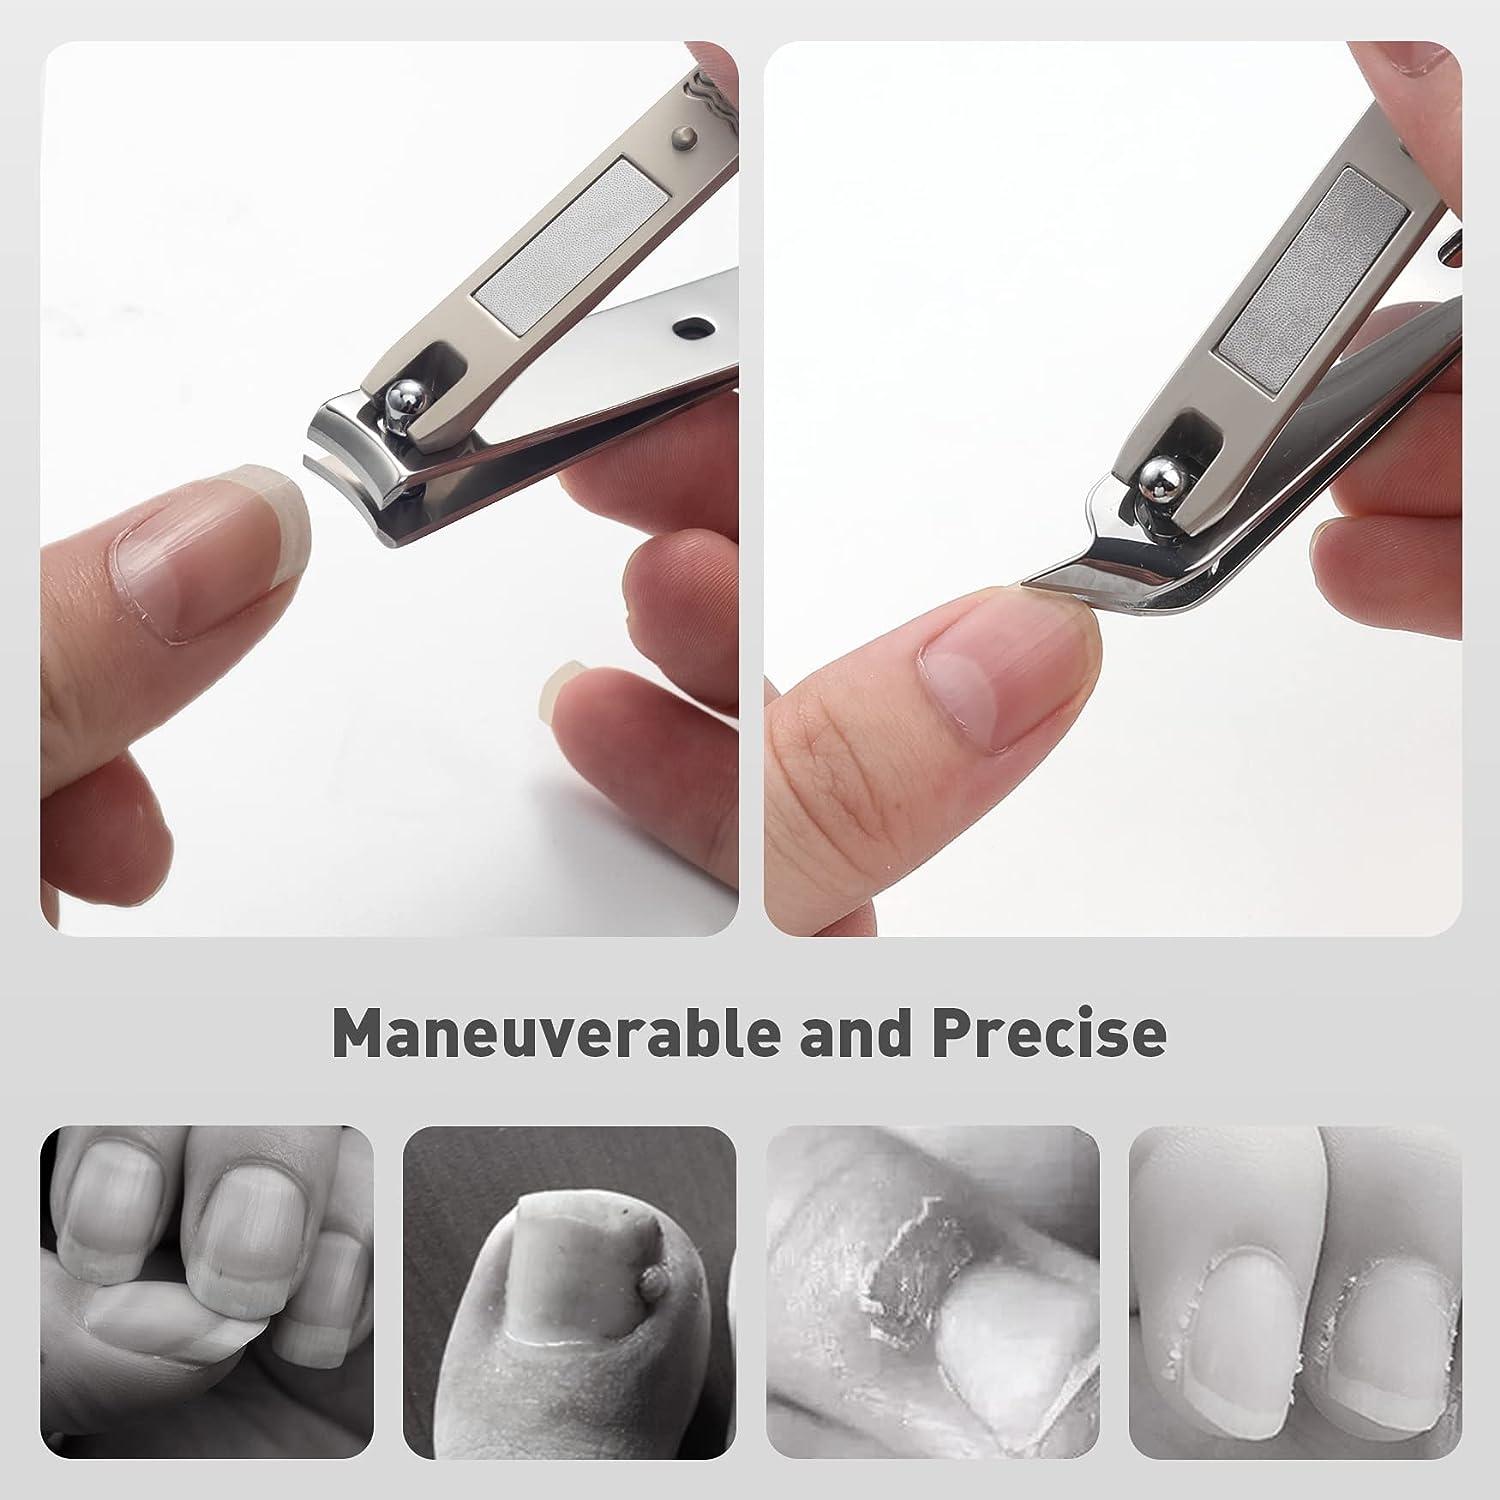 Bezox Toenail Clippers, Nail Clippers Trimmer For Thick Or Ingrown